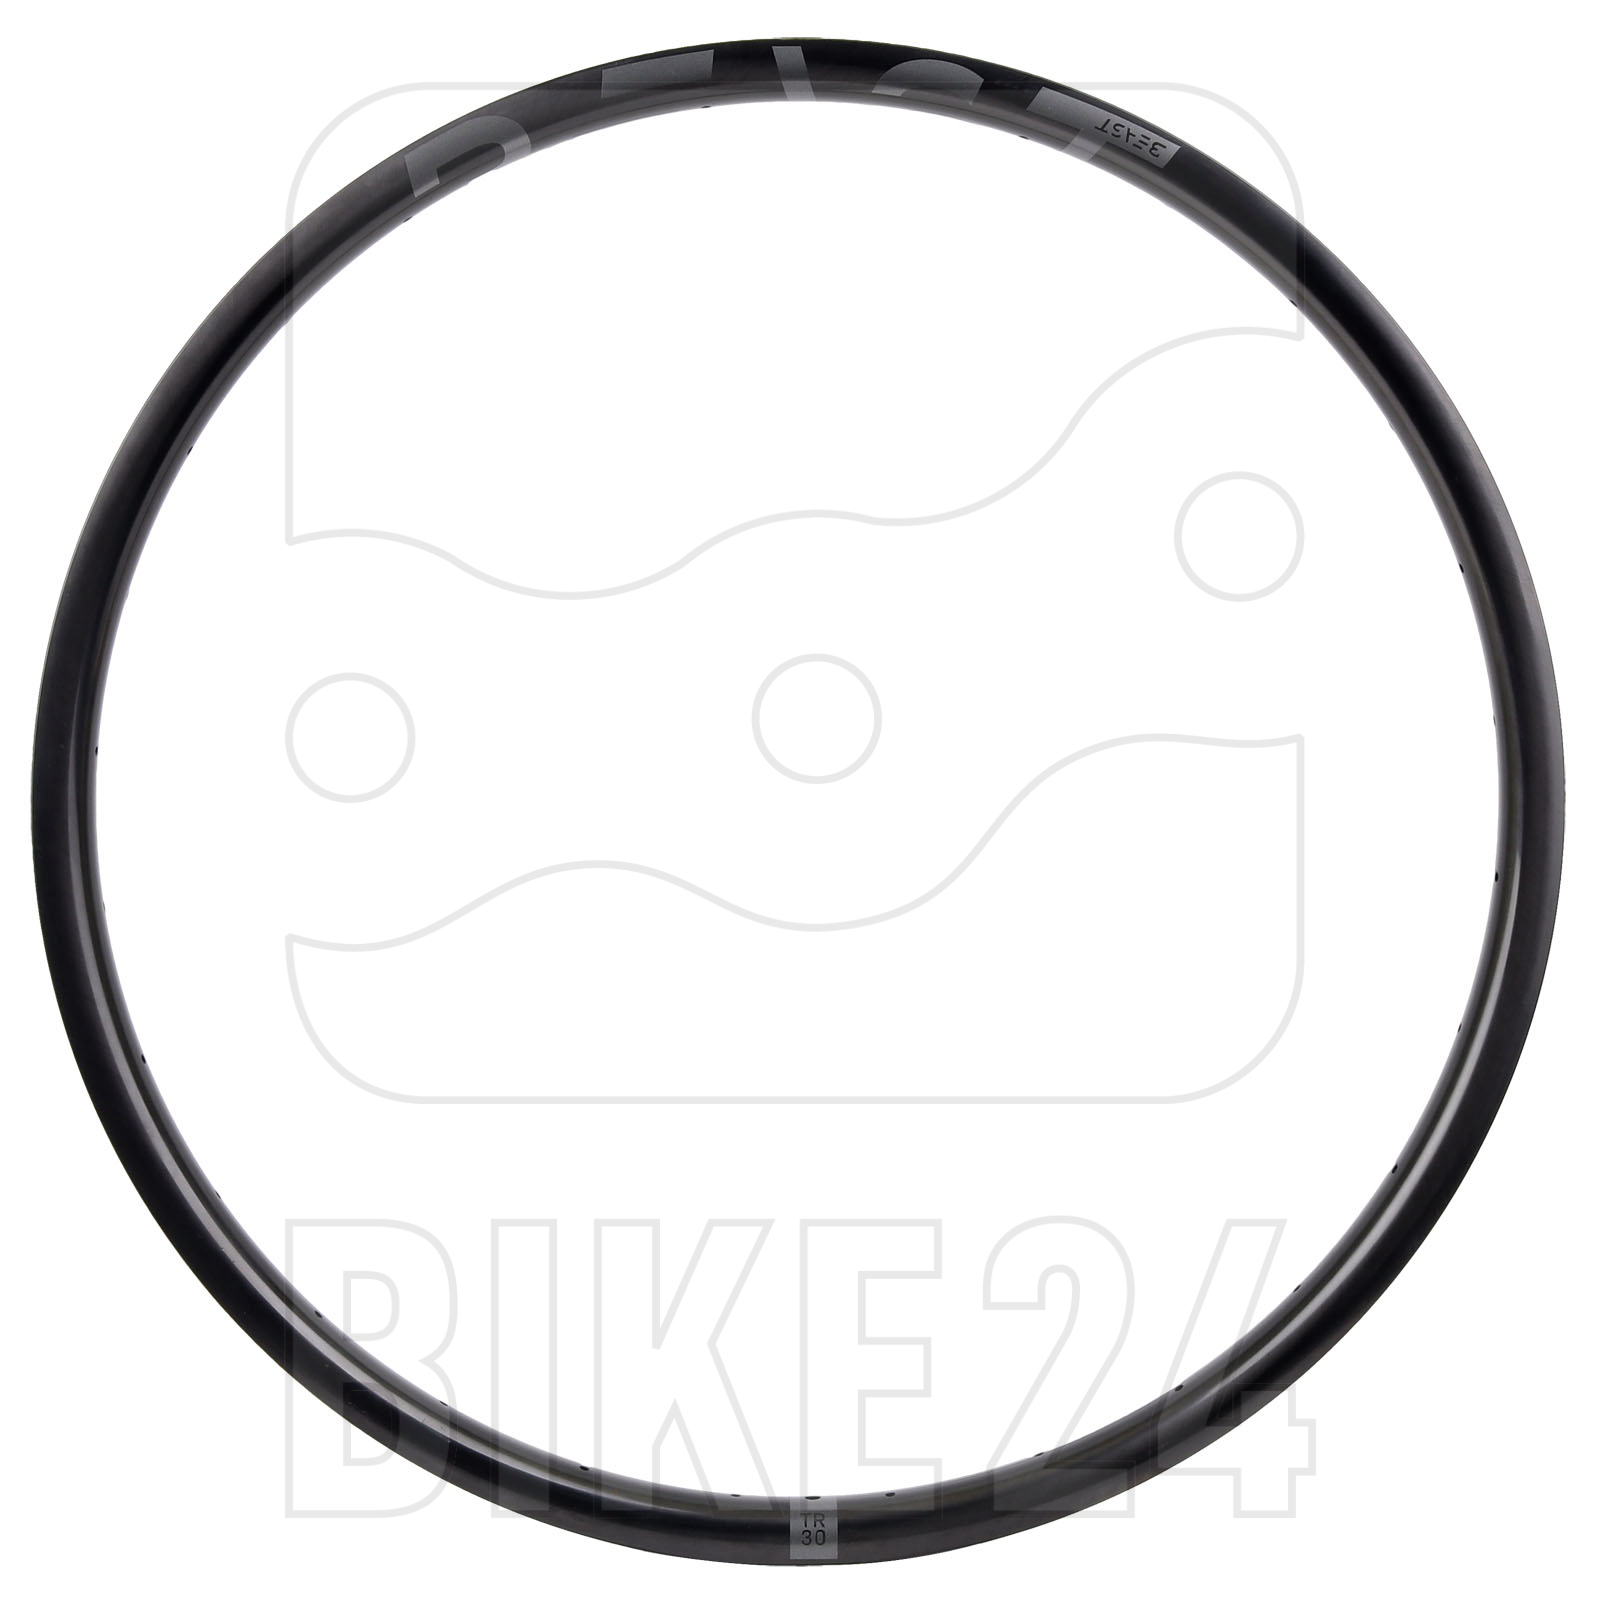 Picture of Beast Components TR30 29 Inch Carbon MTB Rim - UD black